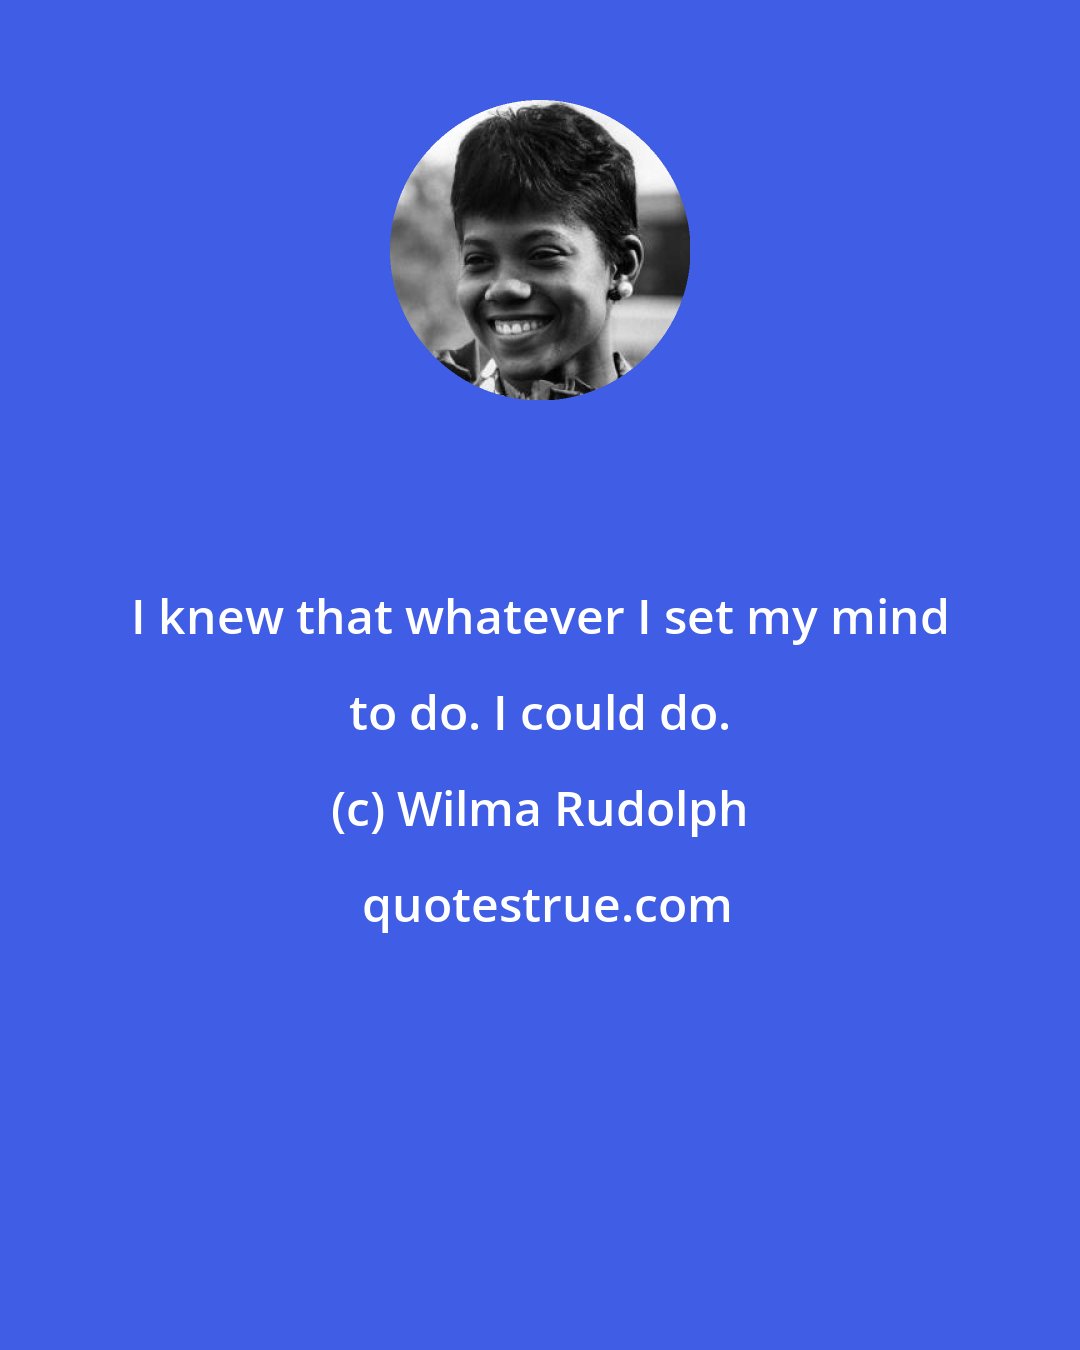 Wilma Rudolph: I knew that whatever I set my mind to do. I could do.